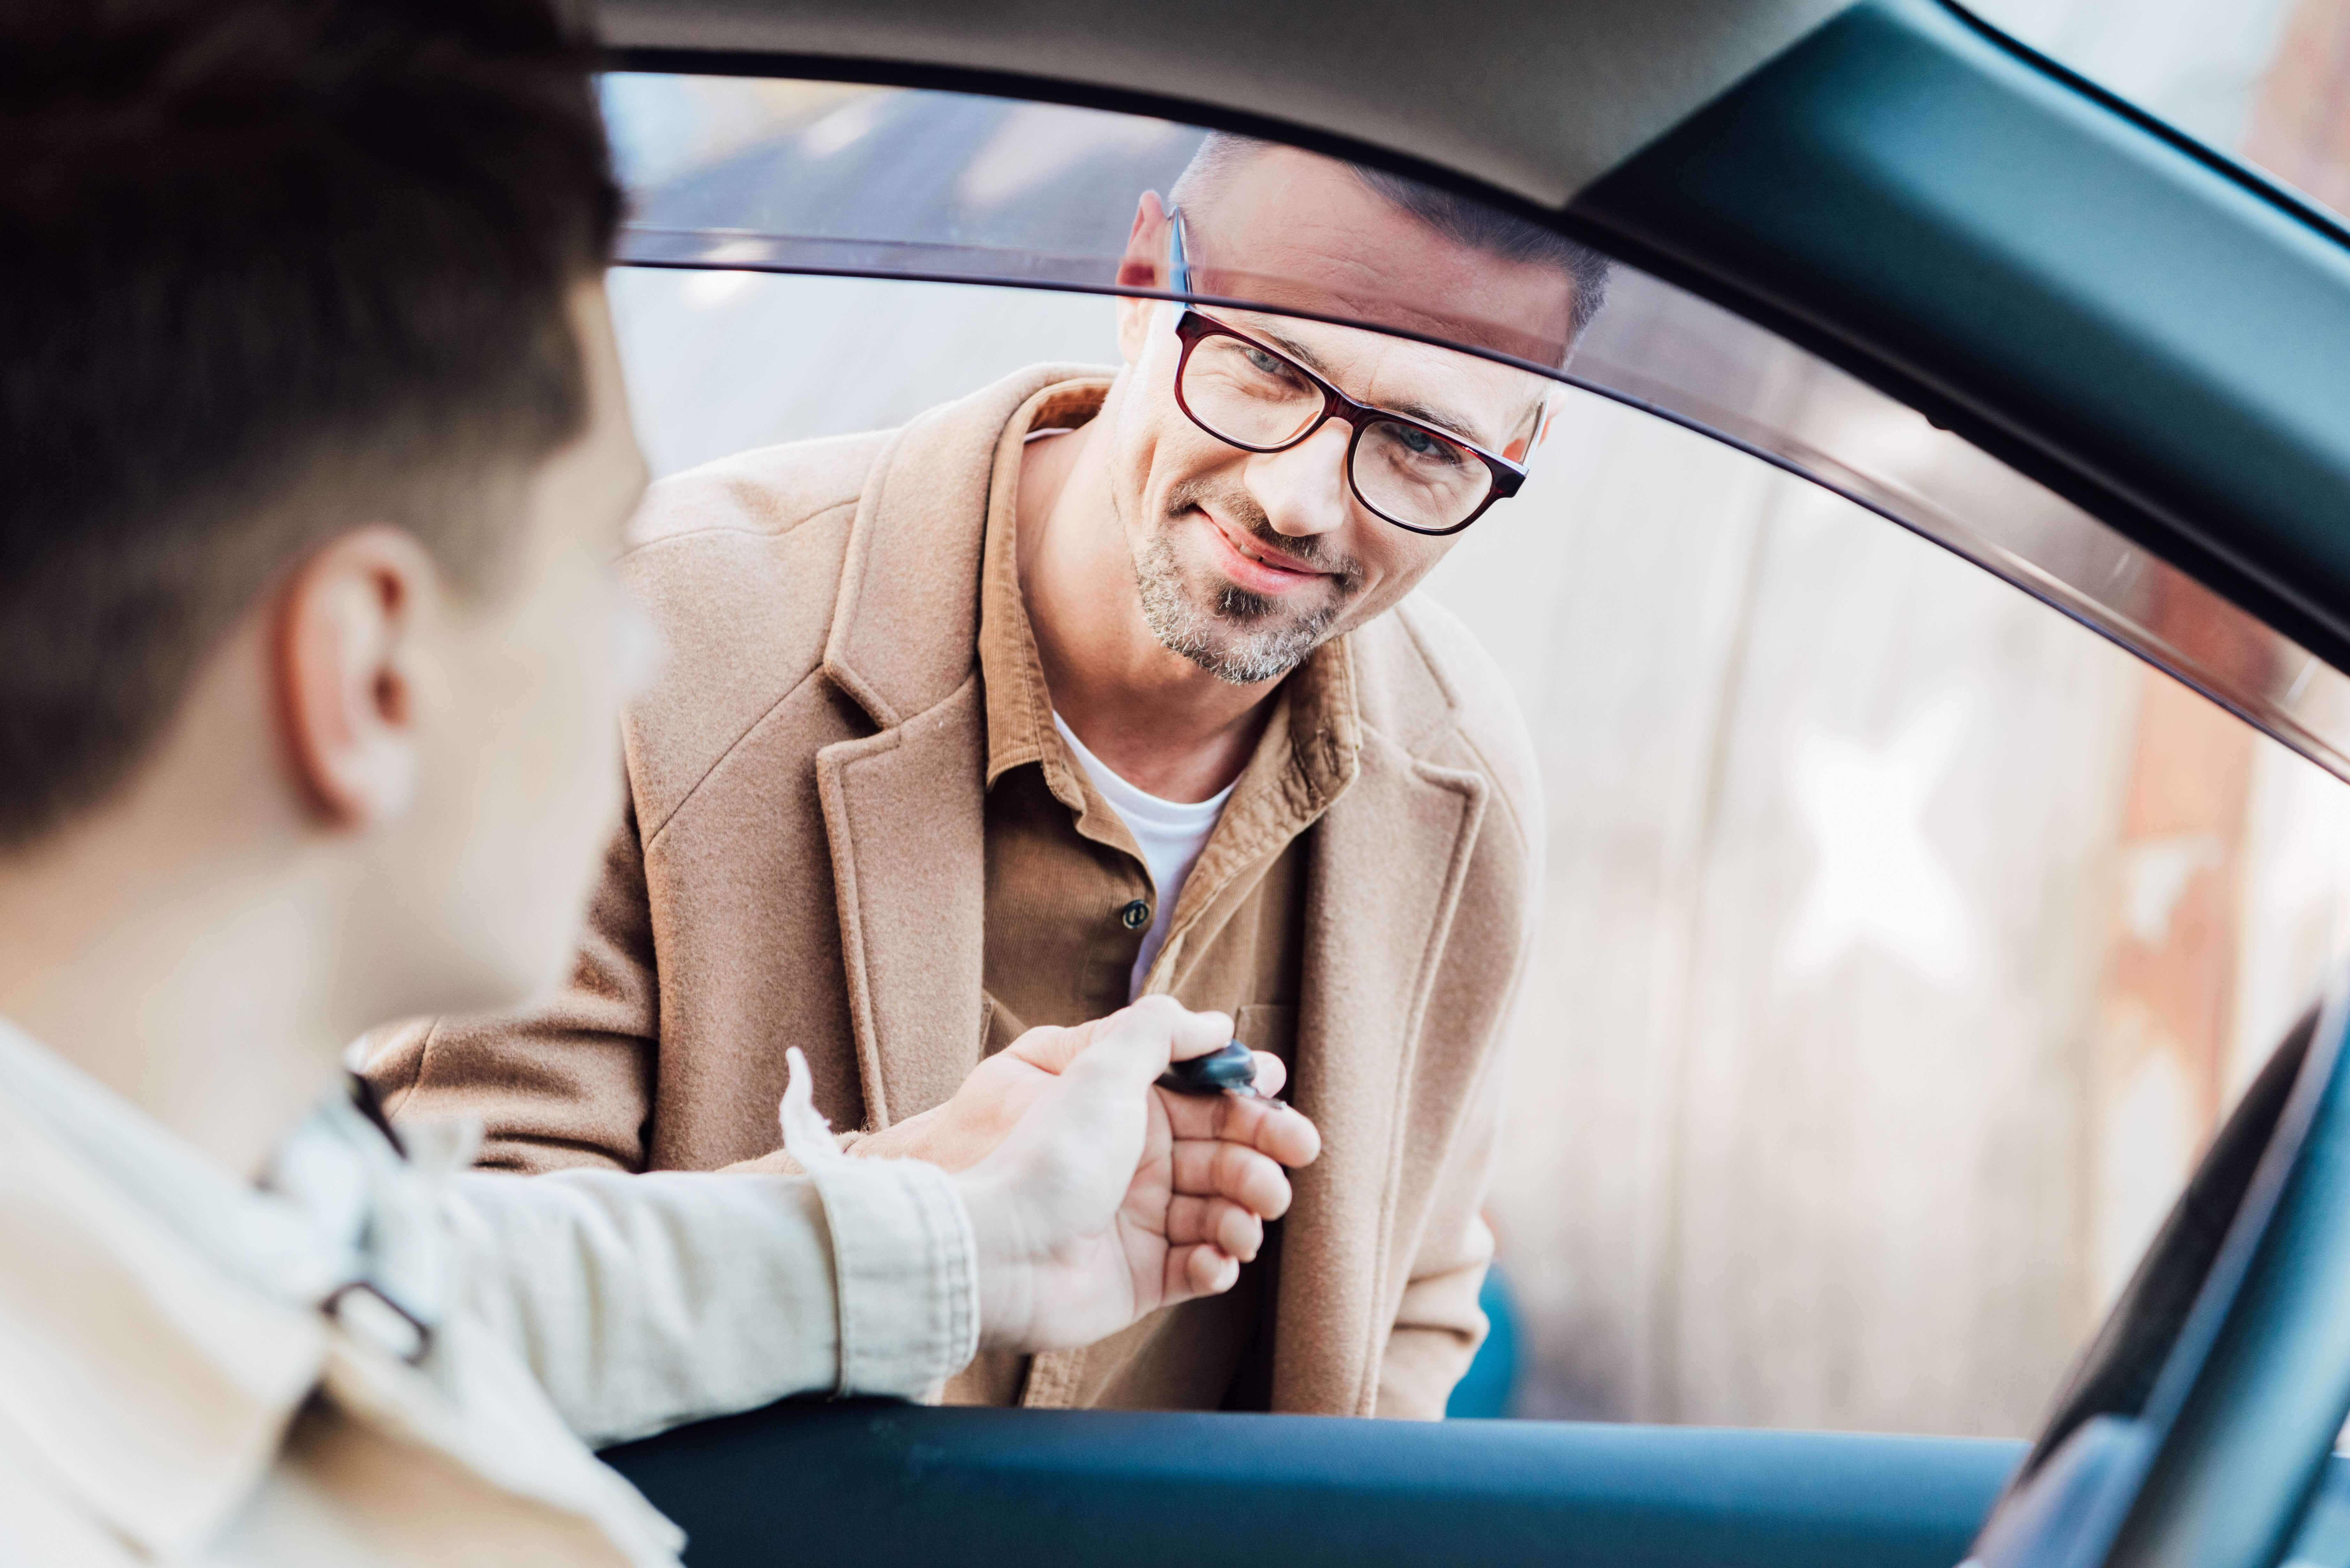 How Often You Should Shop For Car Insurance